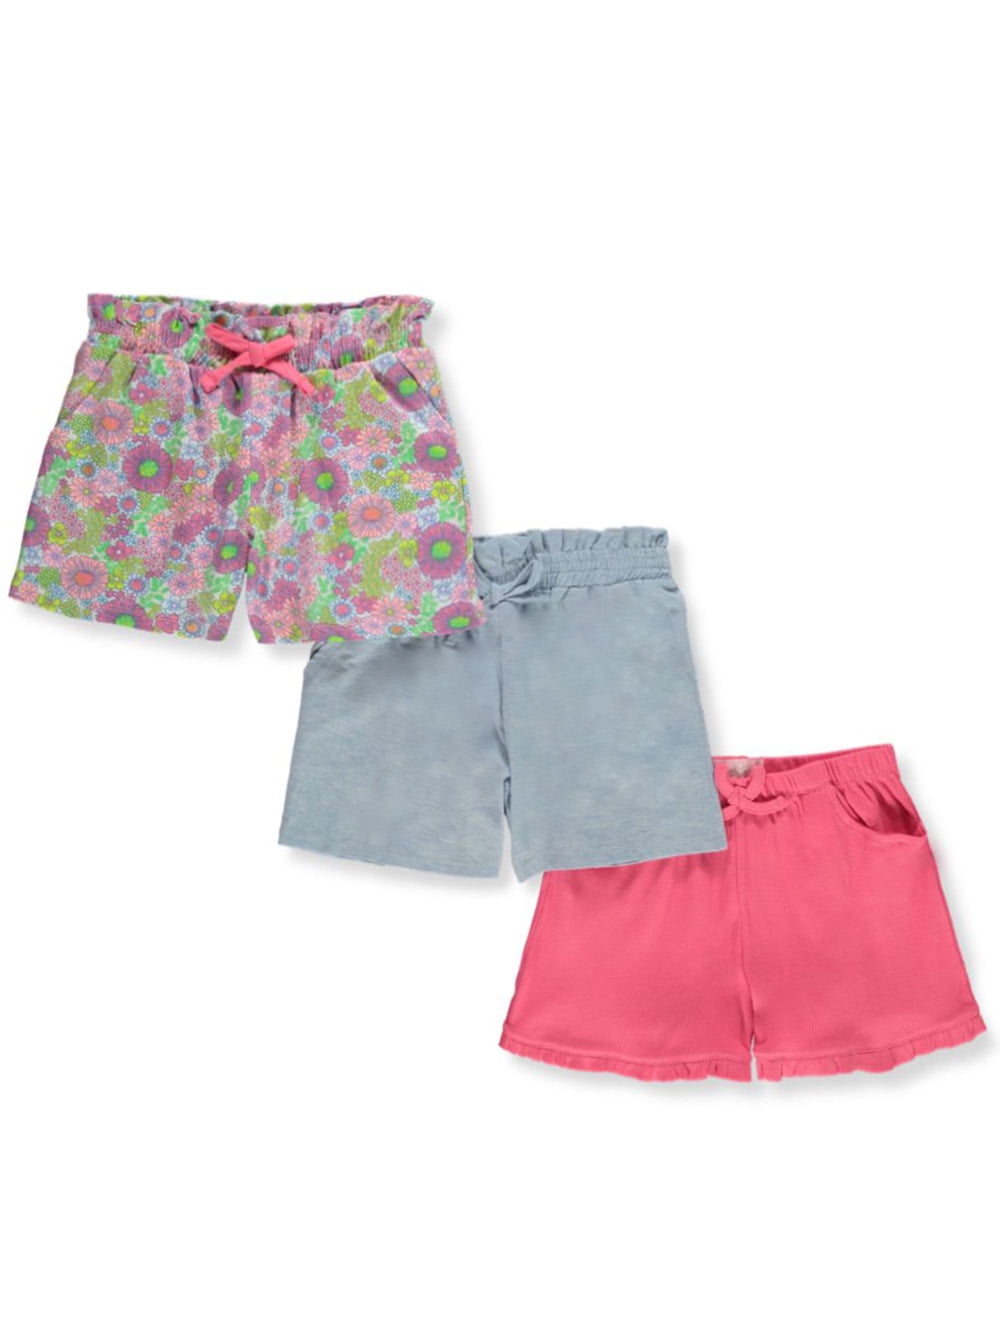 Freestyle Revolution Girls' 3-Pack Hippy Shorts - pink/multi, 2t ...